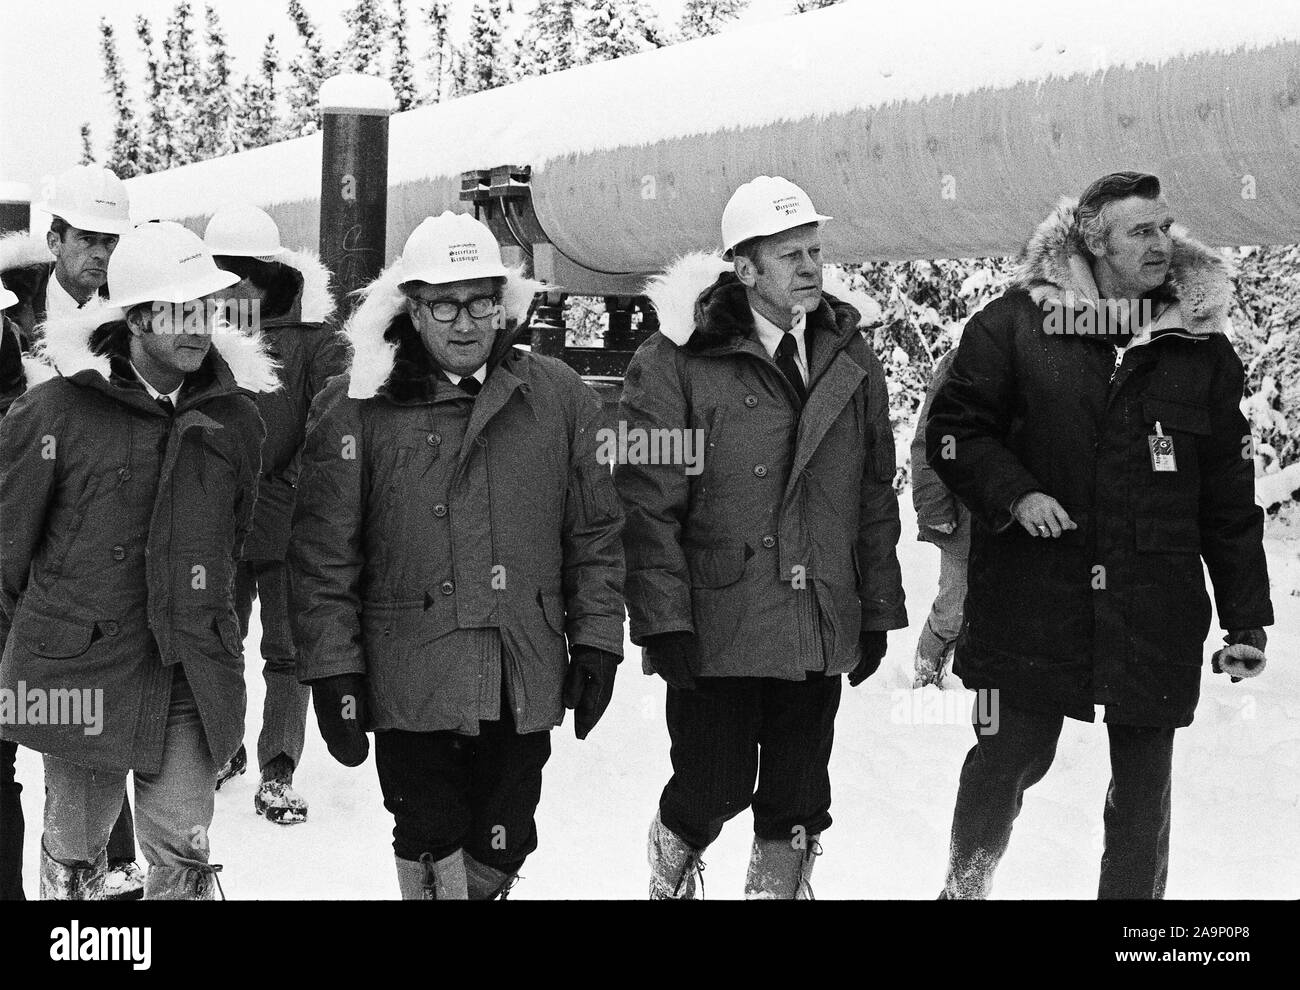 November 29 1975 – Alyeska Pipeline Service Company Pump Station #8 – Fairbanks, AK – Federal Energy Administration Administrator Frank Zarb, Secretary of State Henry Kissinger, and President Ford Touring the Trans-Alaska Pipeline wearing hard hats, arctic weather gear Stock Photo